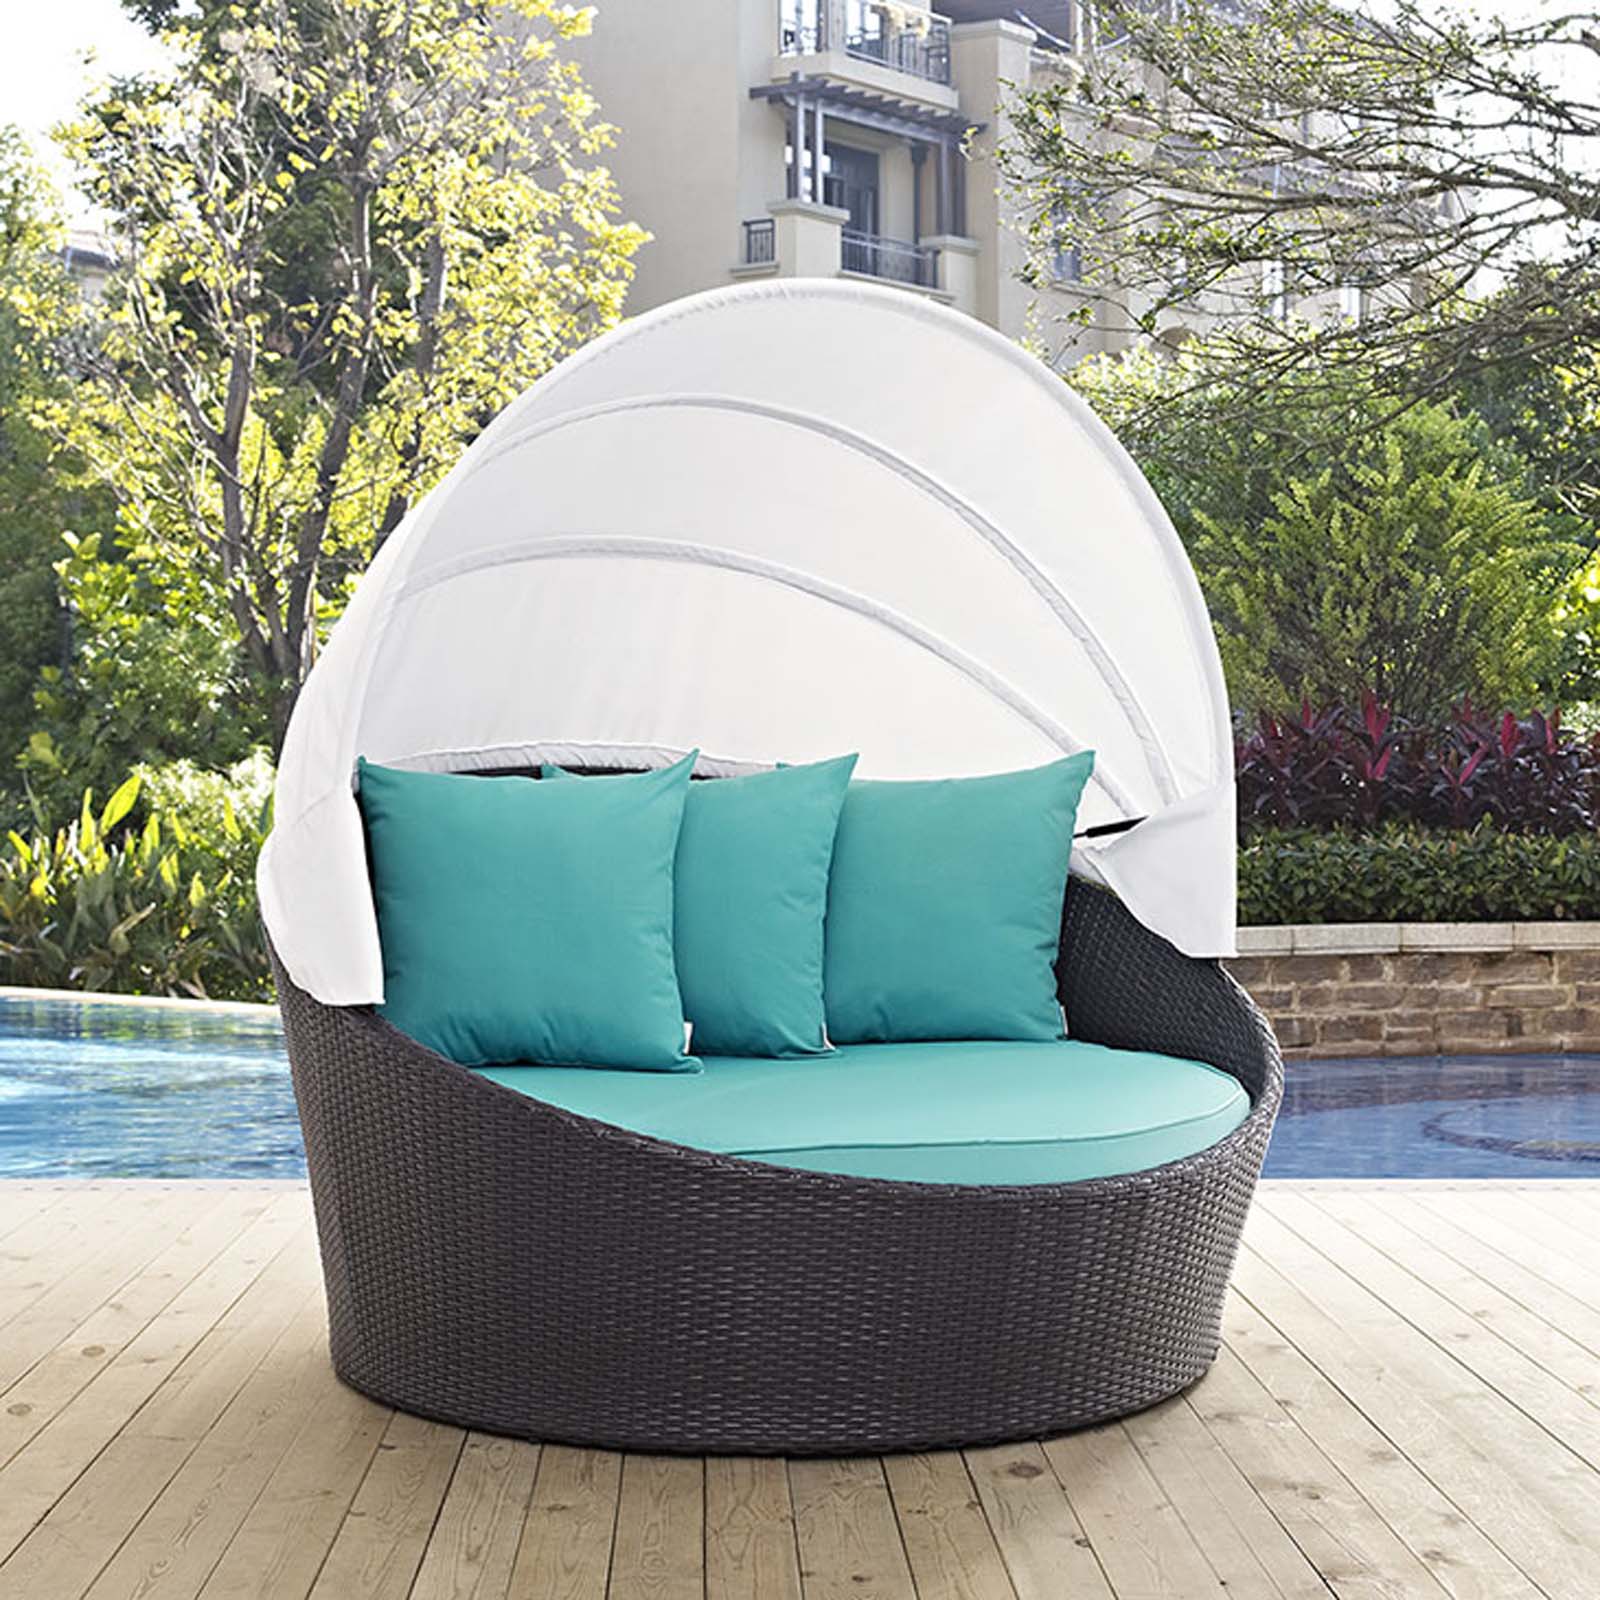 Modterior :: Outdoor :: Daybeds :: Convene Canopy Outdoor Patio Daybed